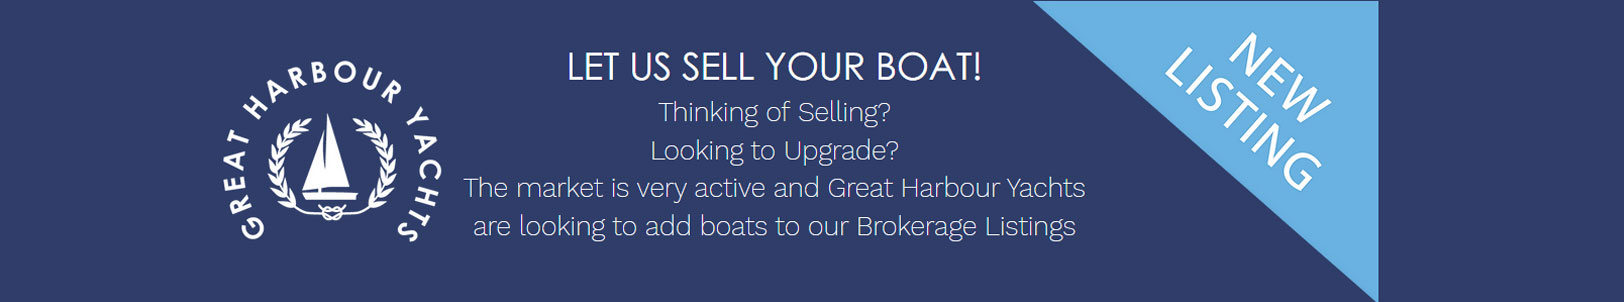 Let Us Sell Your Boat